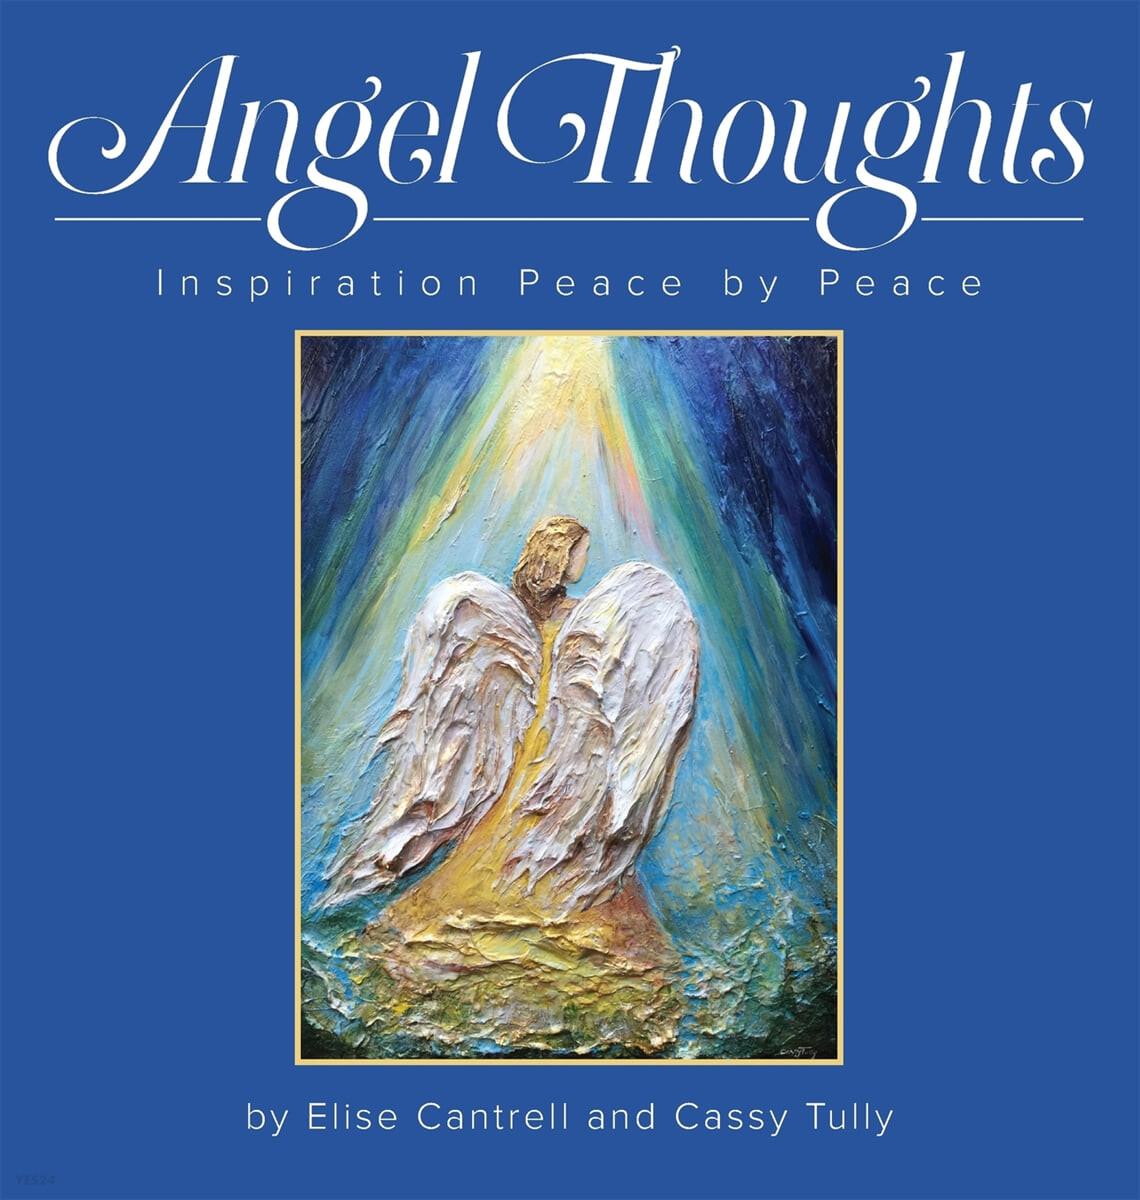 Angel Thoughts (Inspiration Peace by Peace)